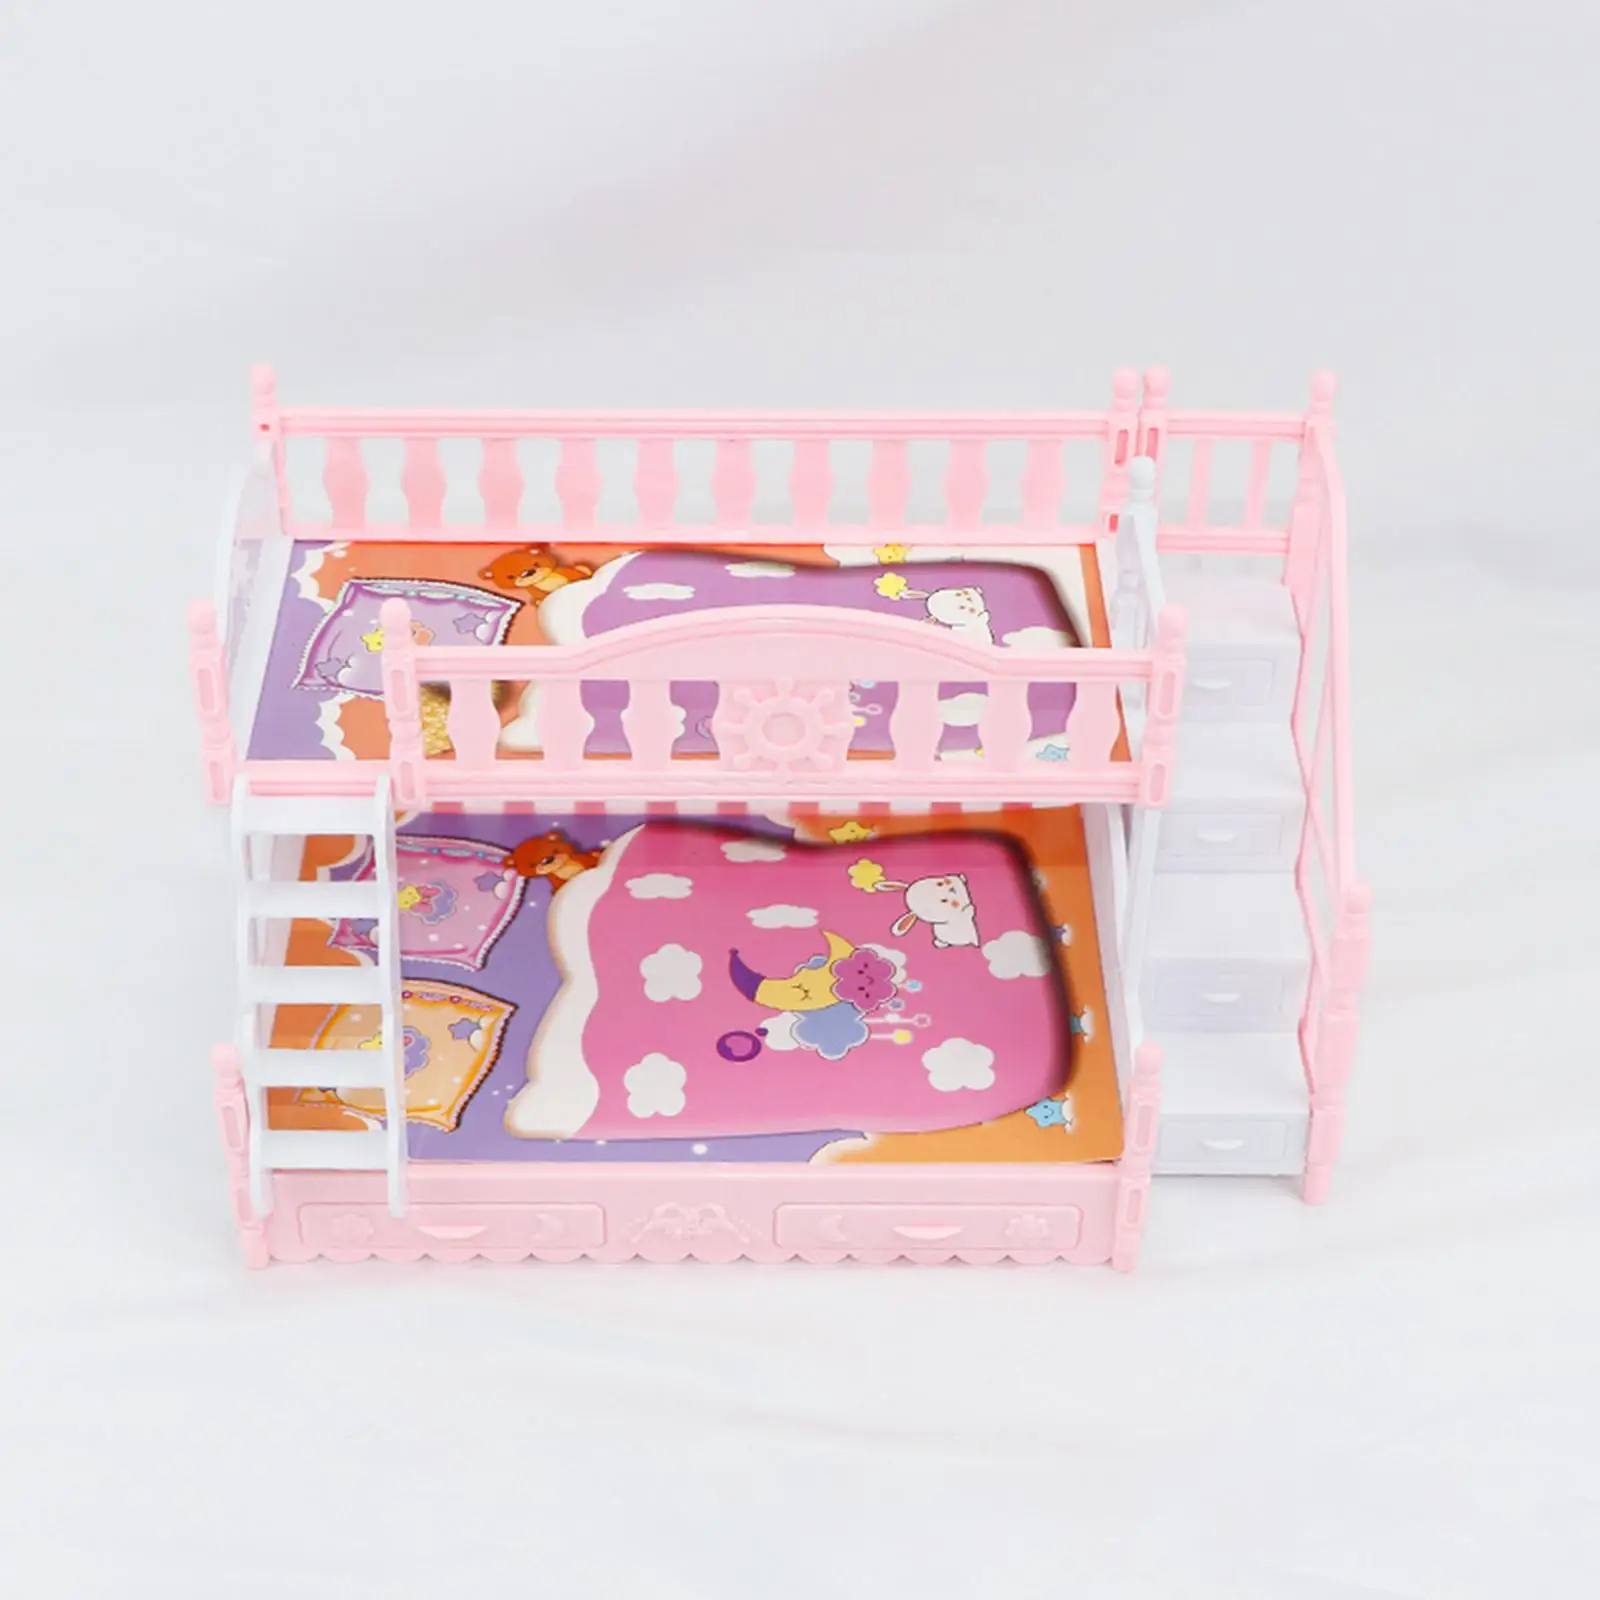 Doll House Furniture Pink W/ Cabinet Ladder Decorative 17cm for Child Girls